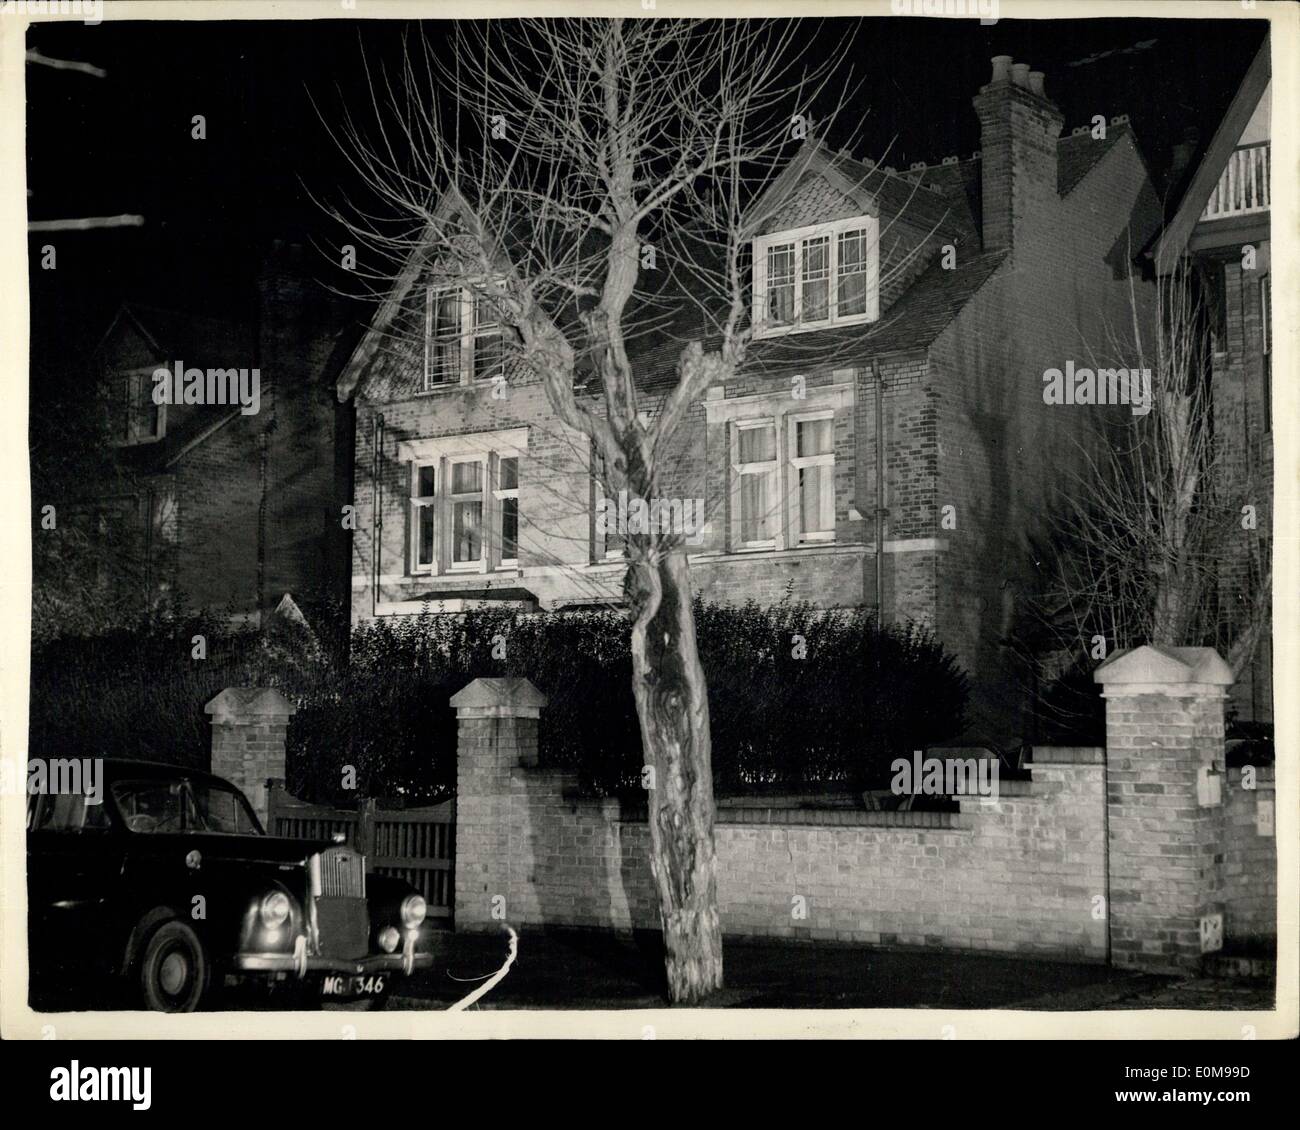 Feb. 17, 1954 - Murder Mystery Man Shoot Himself: Ronald Chesney, wanted for questioning in connection with the murder of his wife and mother-in-law at an Ealing W, old folks' home, shot himself yesterday in a wood near Cologne, Germany. Photo shows View of the old folks' home, No. 22 Montpelier-road, Ealing, W., where Mrs. Chesney and ''Lady'' Menzies were found murdered last week. Stock Photo